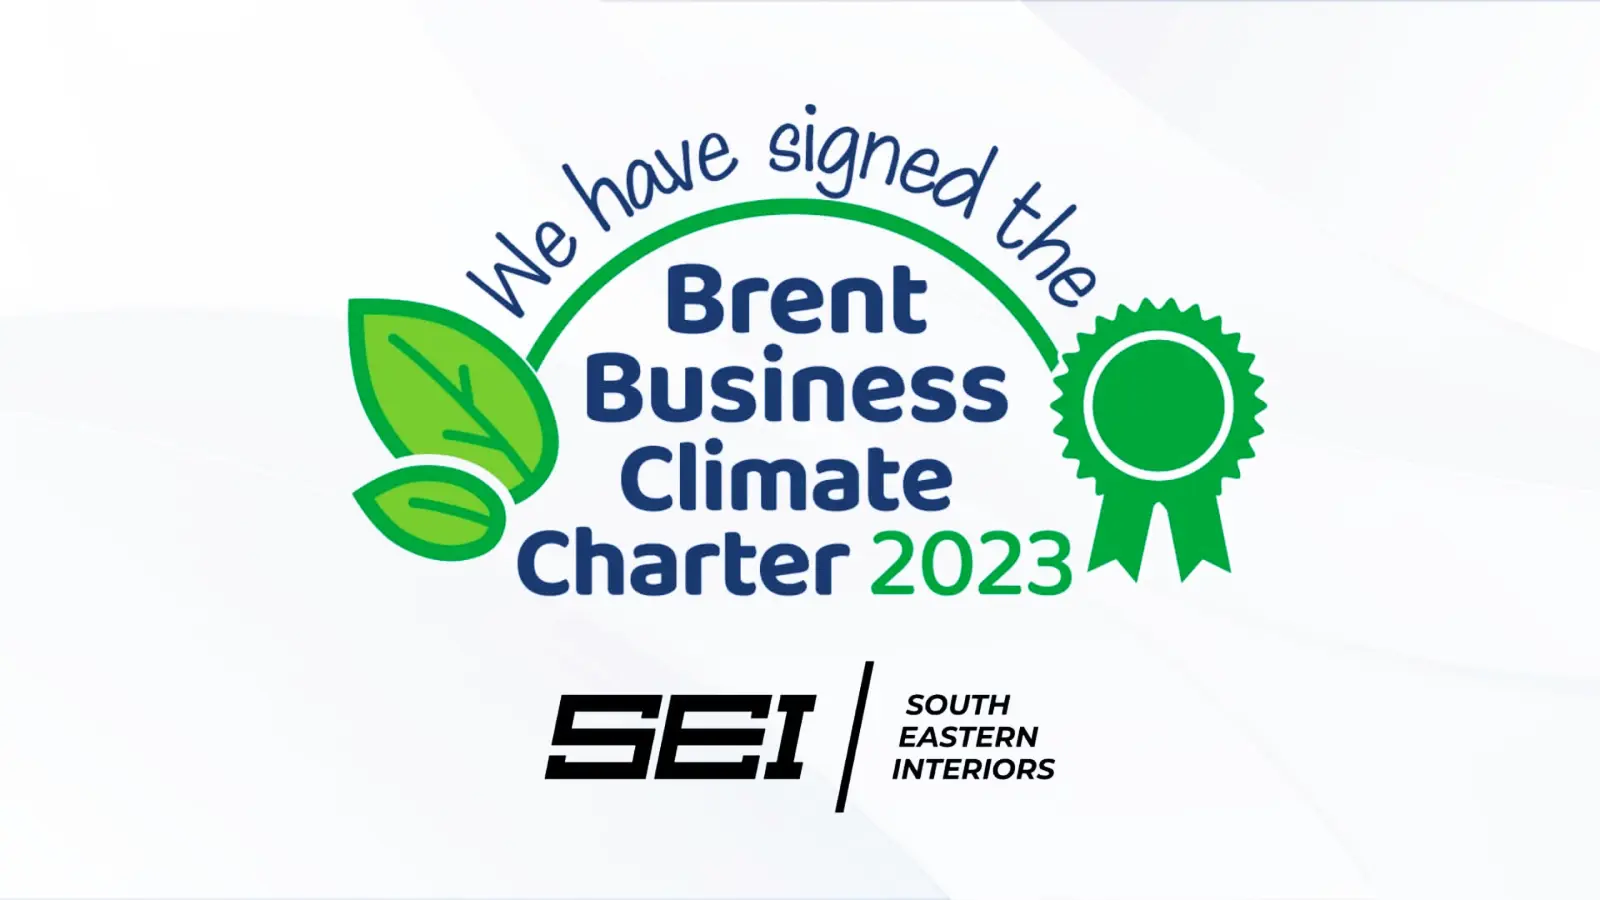 SEI UK Brent Business Climate Charter - accepted